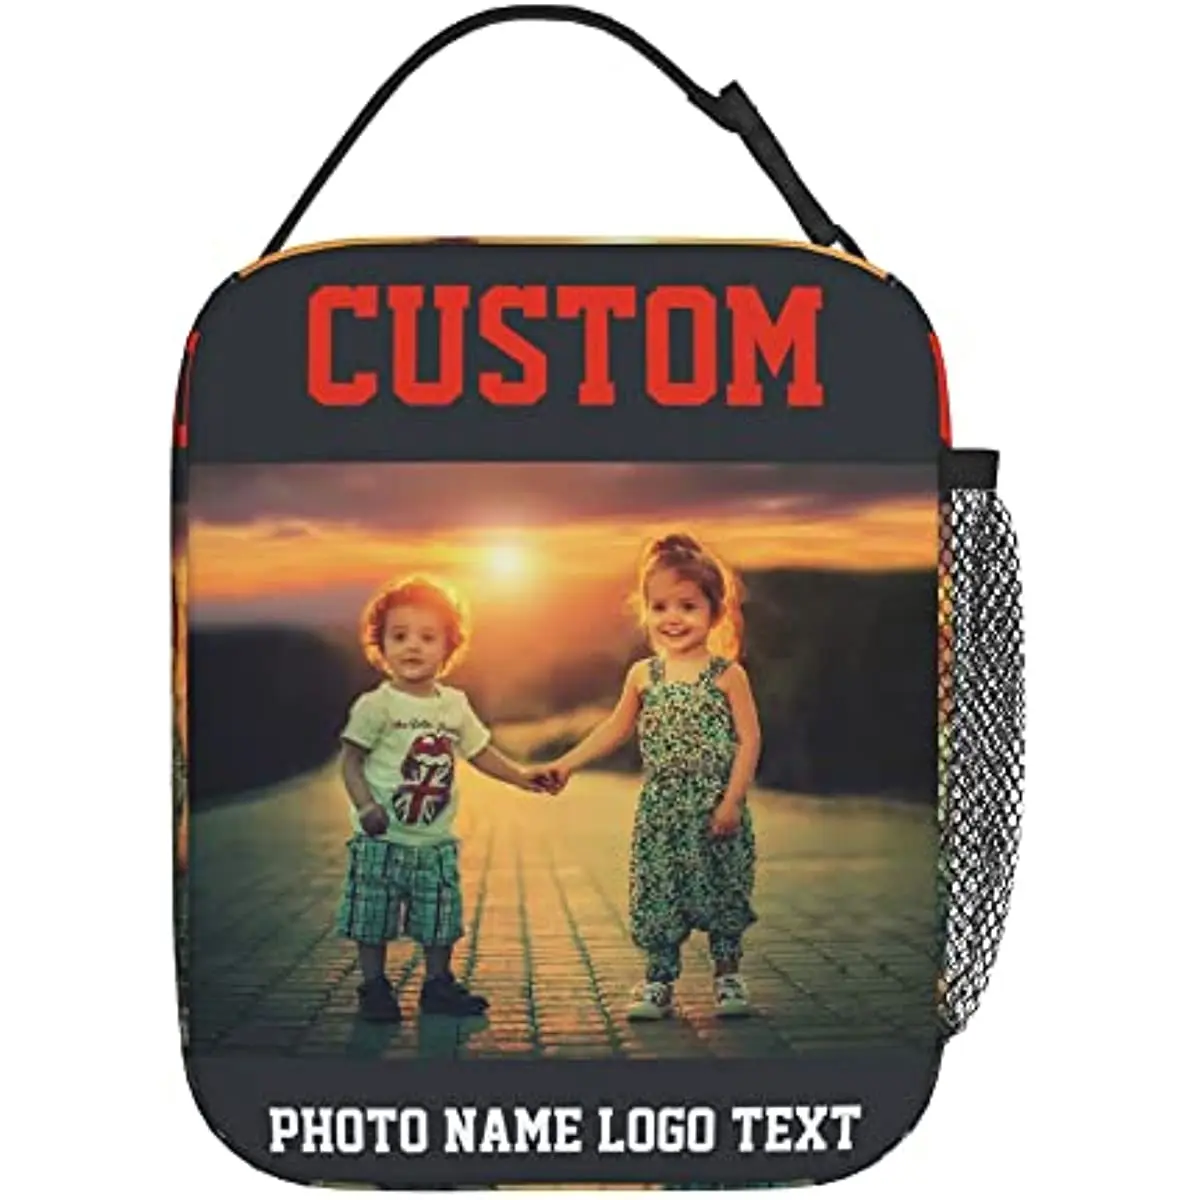 

Customize Personalized Add Your Image Text Logo Totes Lunch Bag Portable Insulated Lunch Box Back To School Picnic Office Travel